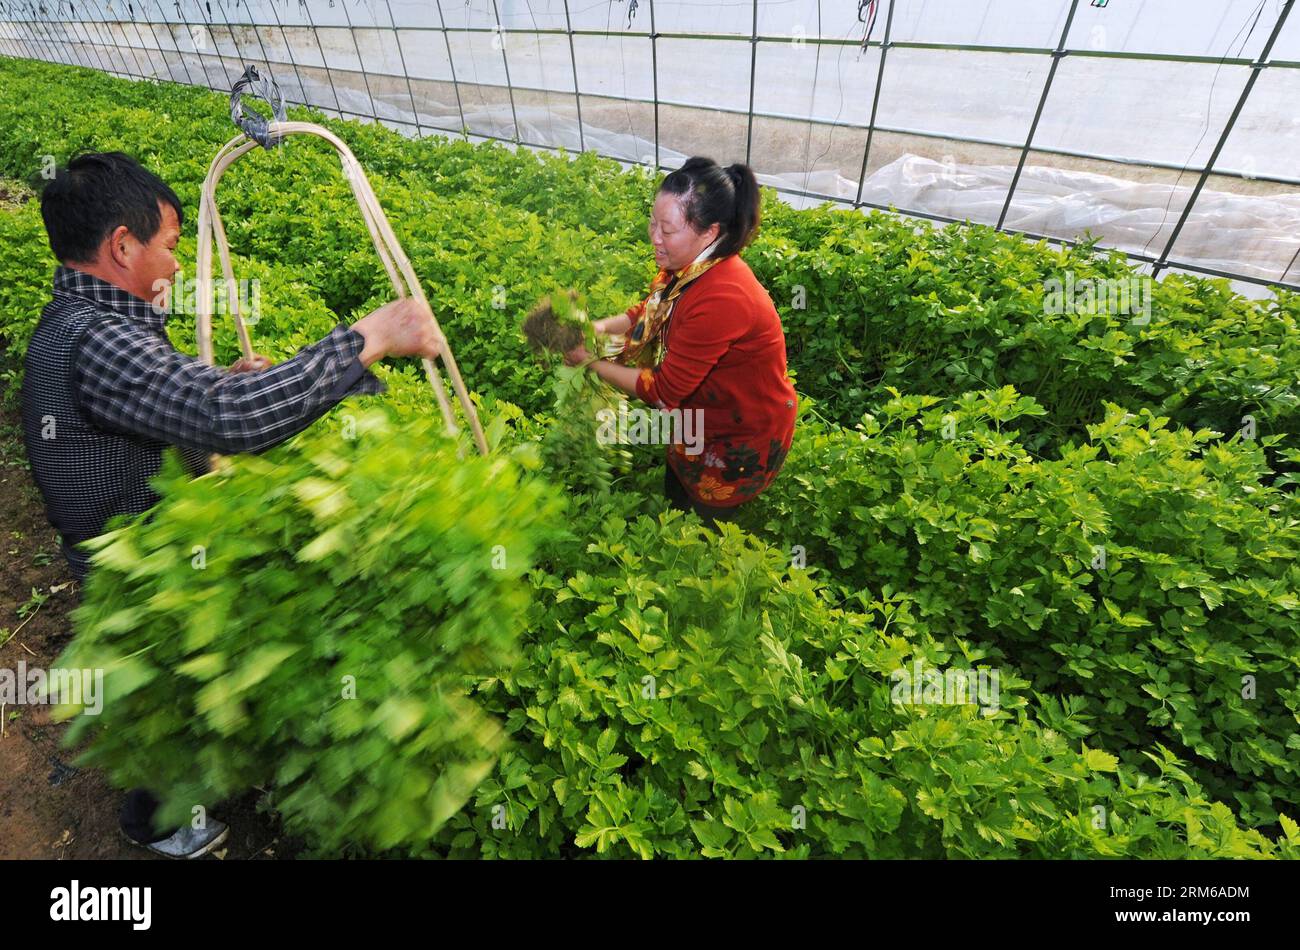 HANGZHOU, Dec. 26, 2013 - Farmers pick celery at an agricultural company in Wuyi County, east China s Zhejiang Province, Dec. 26, 2013. The per capita net income of farmers in Zhejiang reached 16,122 yuan (2,657 U.S. dollars) in the first nine months this year, which is expected to be the highest per capita income of the country s rural residents. (Xinhua/Tan Jin) (ry) CHINA-ZHEJIANG-FARMERS (CN) PUBLICATIONxNOTxINxCHN   Hangzhou DEC 26 2013 Farmers Pick celery AT to Agricultural Company in Wuyi County East China S Zhejiang Province DEC 26 2013 The per Capita Net Income of Farmers in Zhejiang Stock Photo